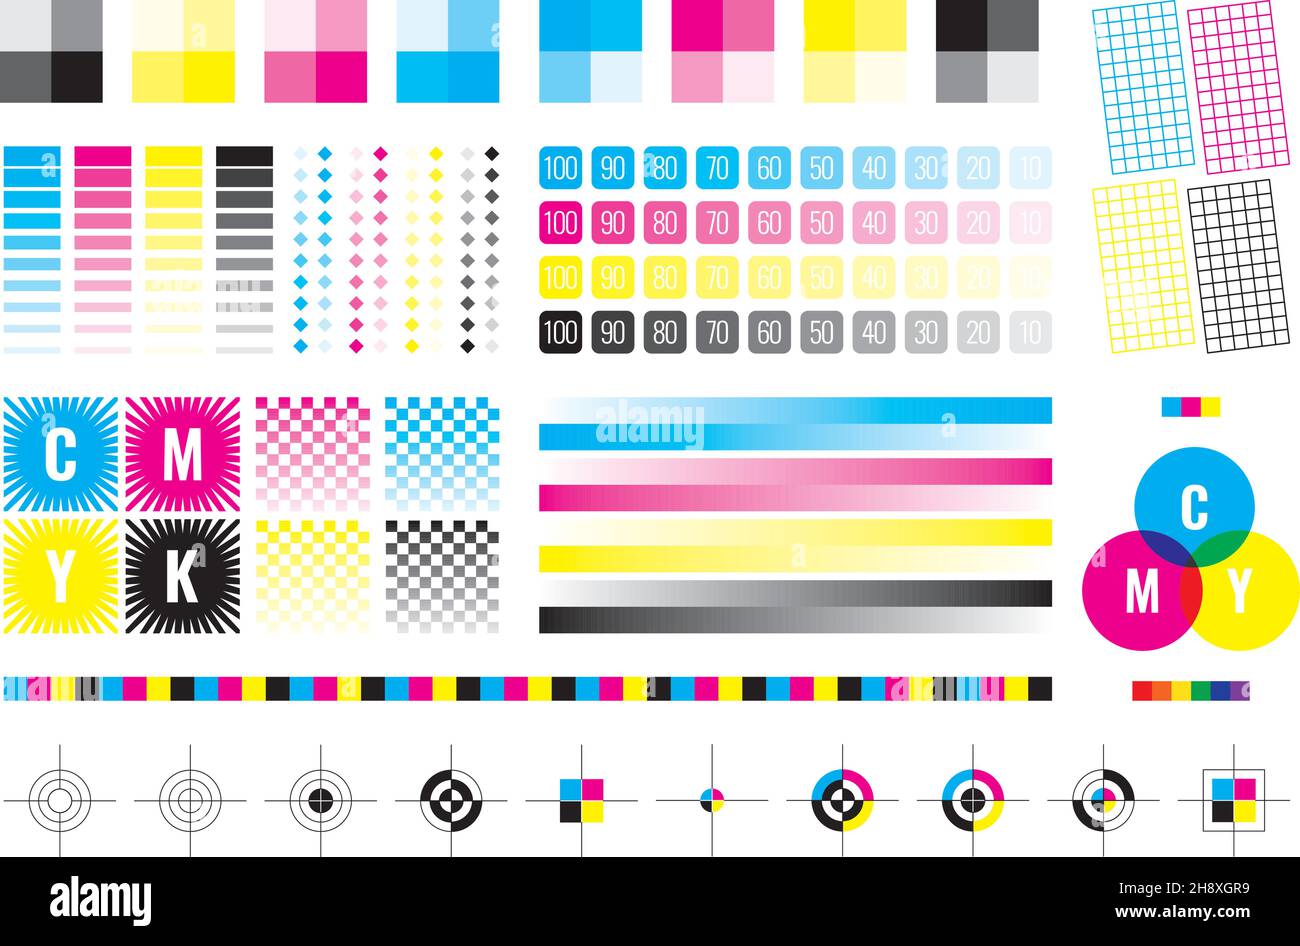 Cmyk marks. Colorful bars for color divices calibration printing house paper templates cyan yellow black garish vector illustrations collection Stock Vector